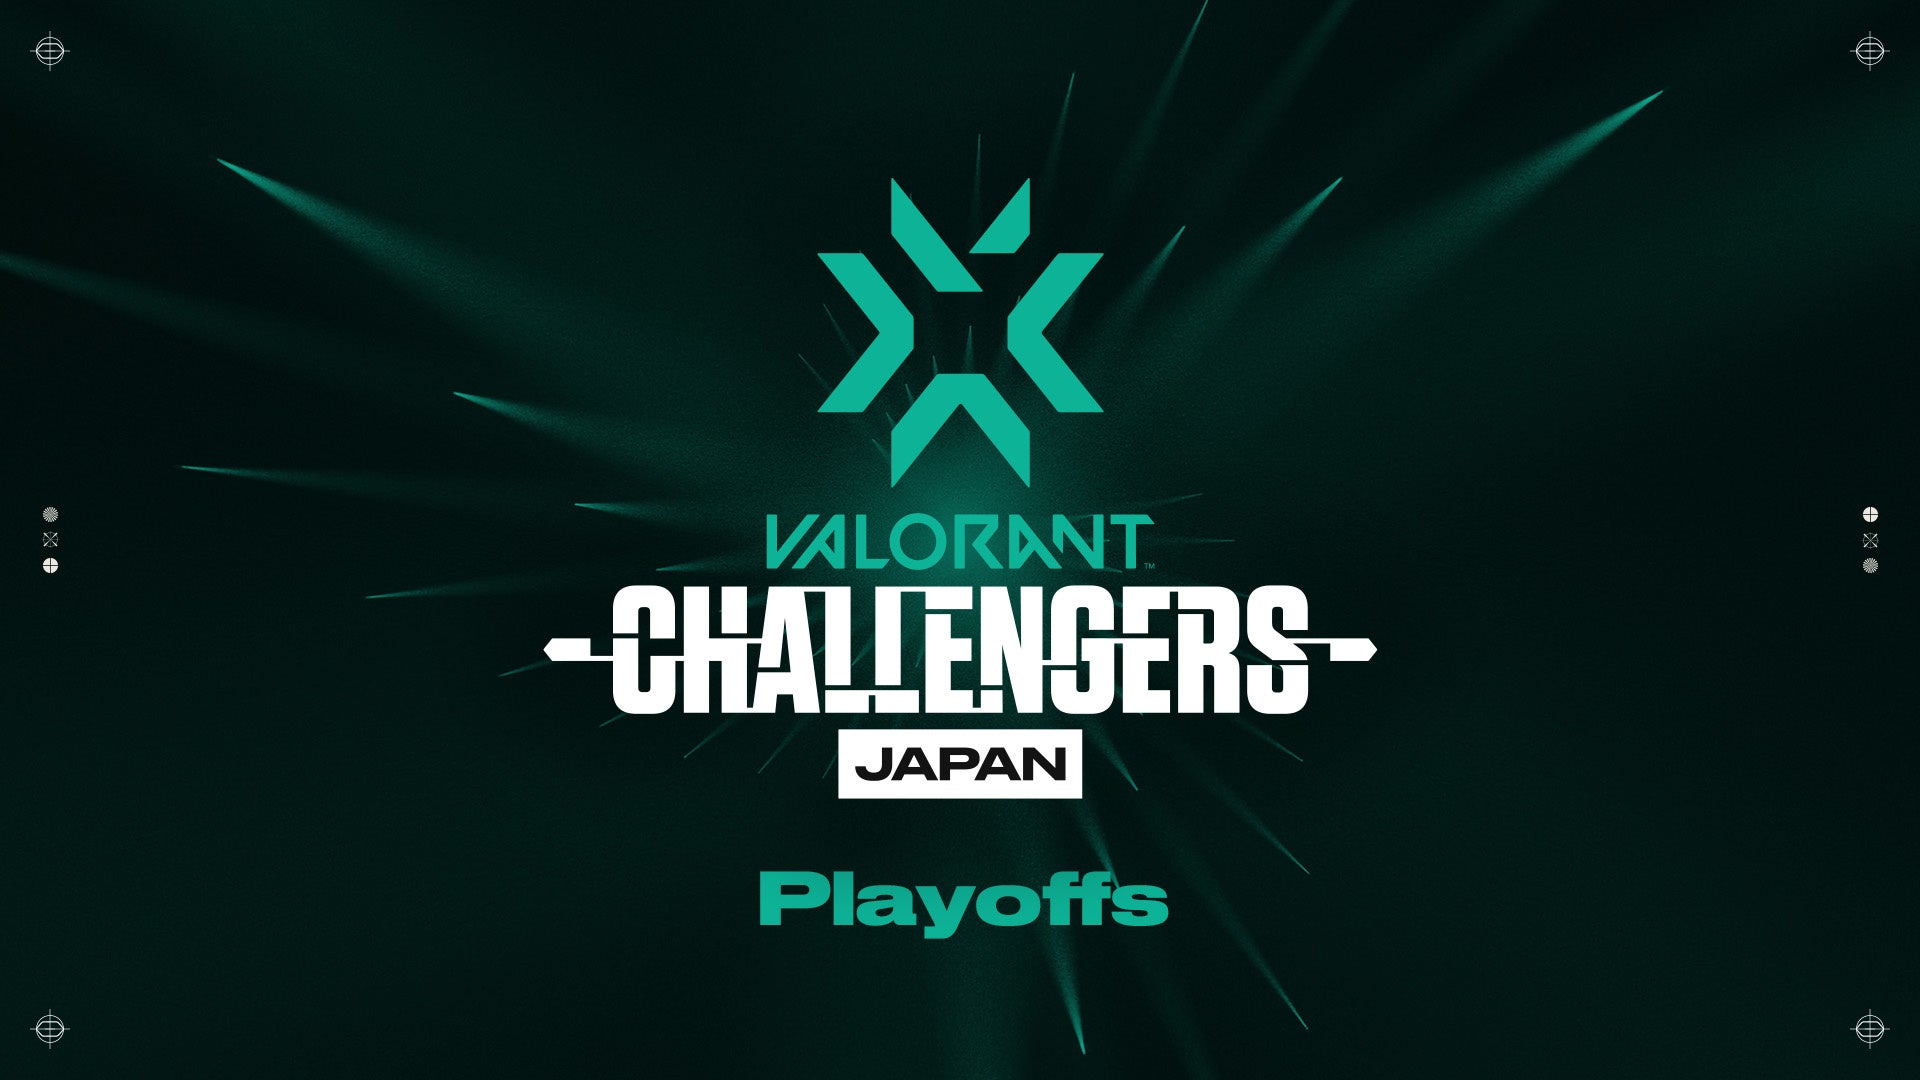 『2022 VALORANT Champions Tour Challengers Japan Stage2』Playoffs 6月10日〜12日、25日、26日の5日間で開催！